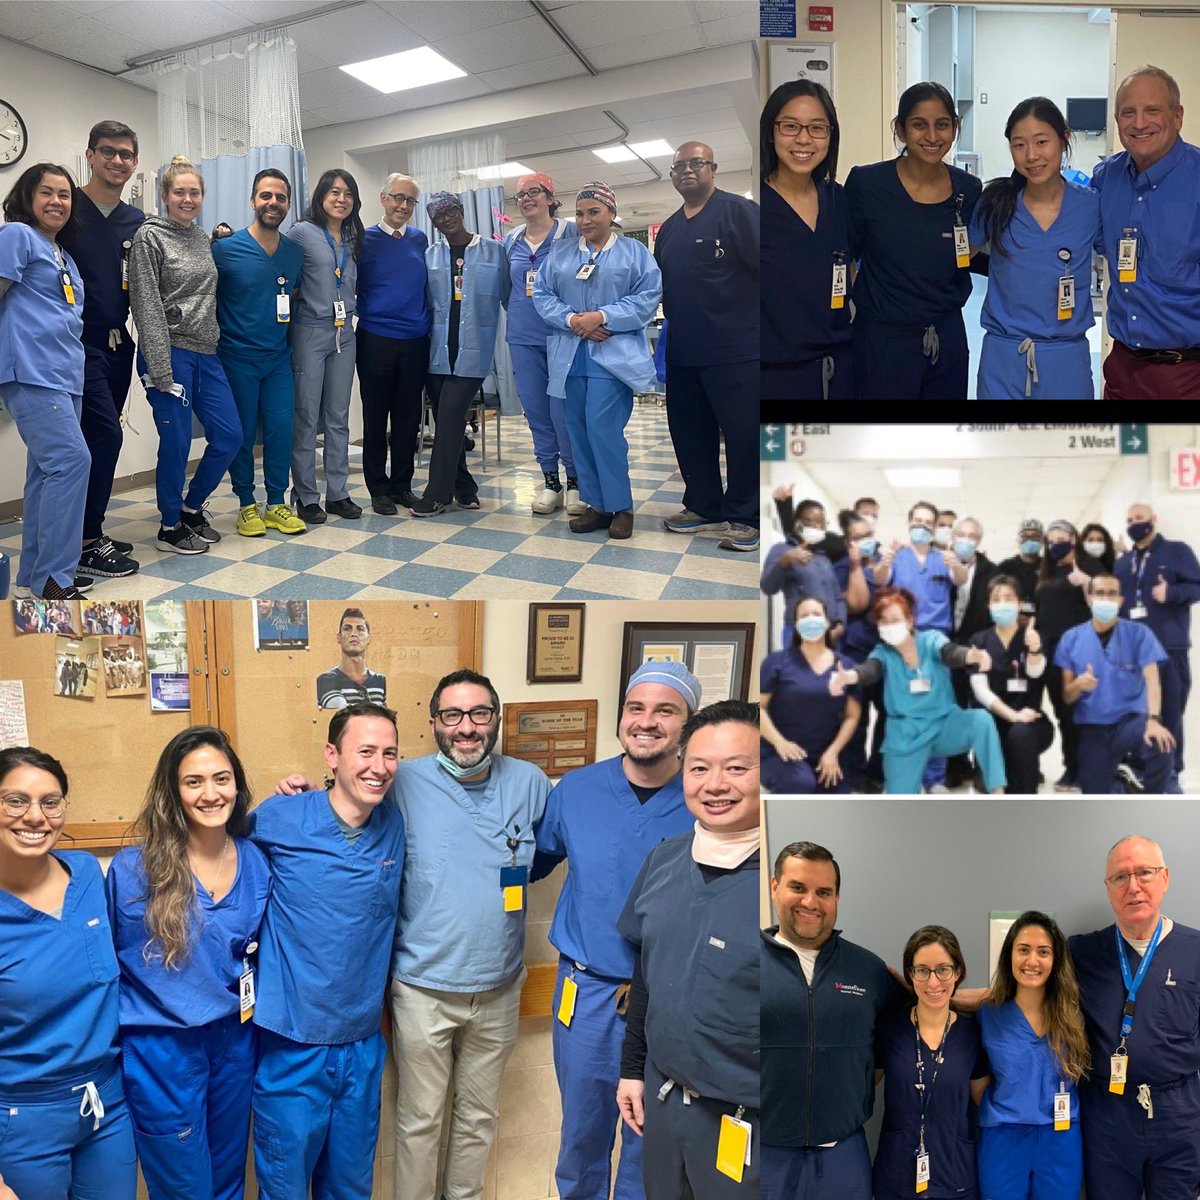 We take #ColonCancerAwarenessMonth #45isTheNew50 with @AmCollegeGastro seriously at @MontefioreNYC for #DressInBlueDay! Talk with your doctor about getting screened! #GITwitter #GIfellows @EinsteinDeptMed @nycHealthy. Our incredible family at our various sites today!